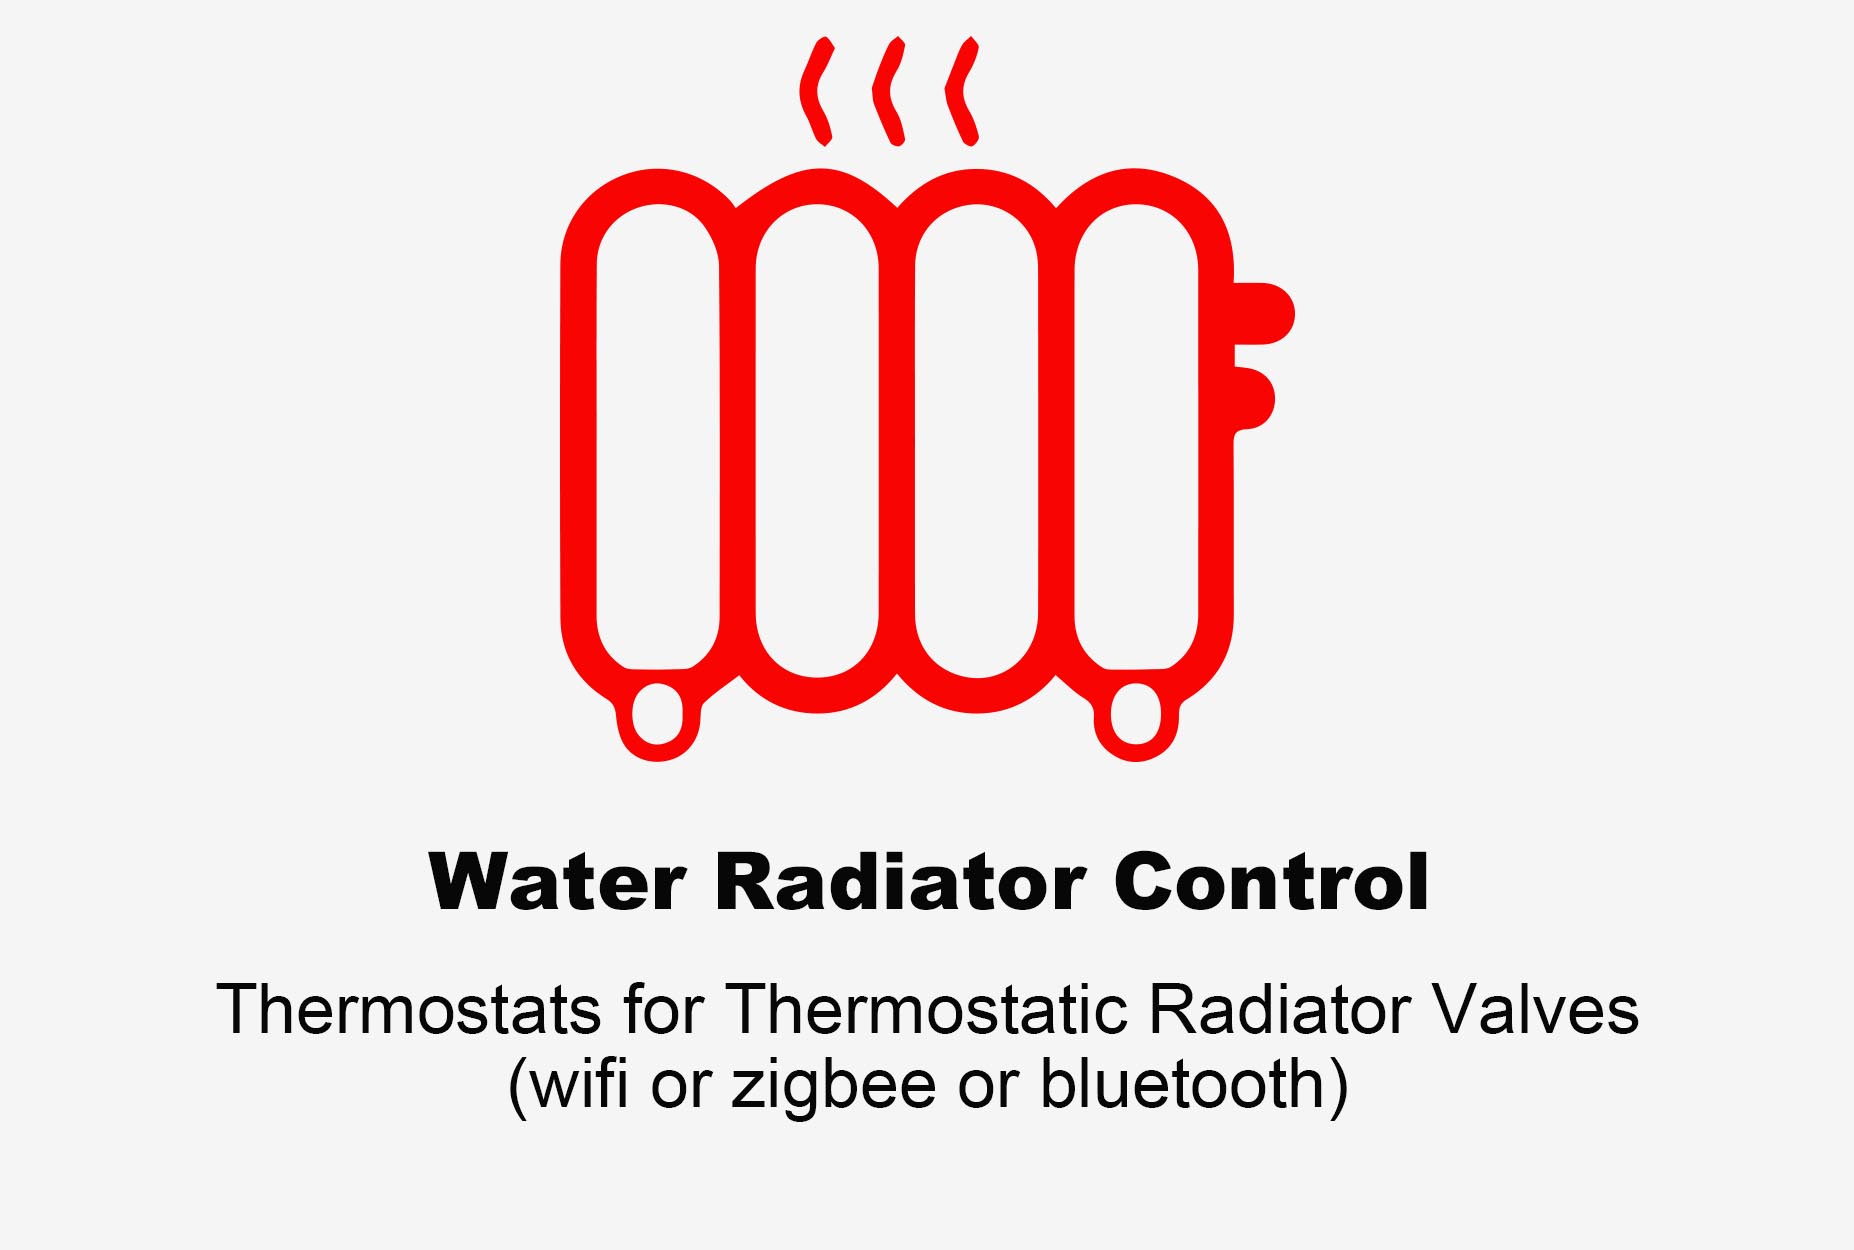 Water Radiator Thermsotat , Bluetooth Thermostat, Zigbee Radiator Thermostat, Wifi radiator thermostat